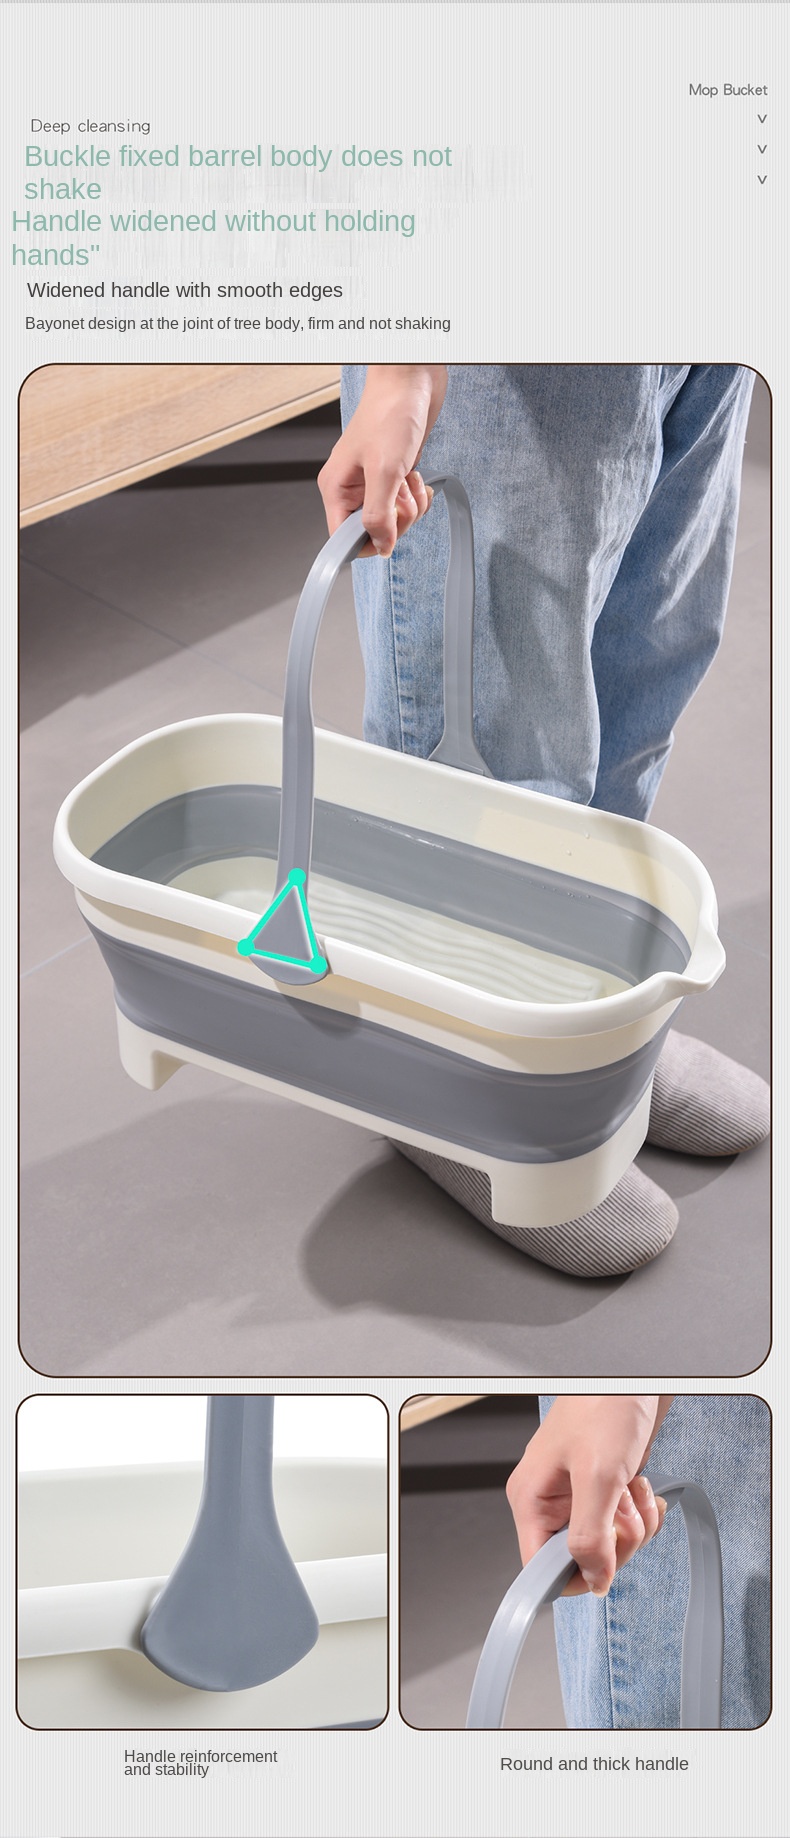 Foldable Water Bucket, Flexible Material Bucket Folding Mop, Secure Grip  Cleaning Mop Bucket, Durable Collapsible Bucket, Multi-Function Foldable